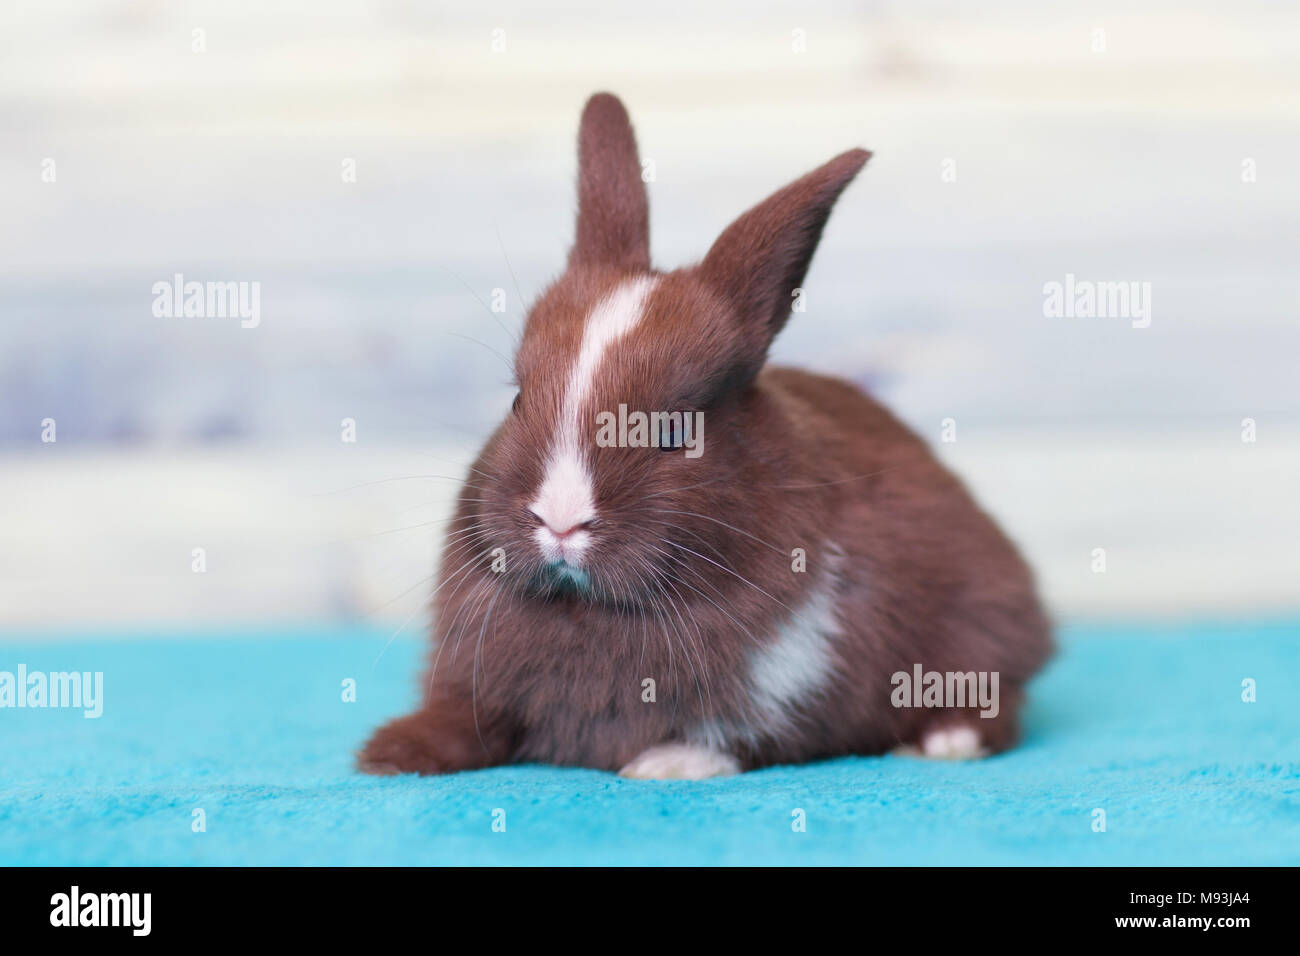 Adorable little bunny rabbit with a stripe Stock Photo